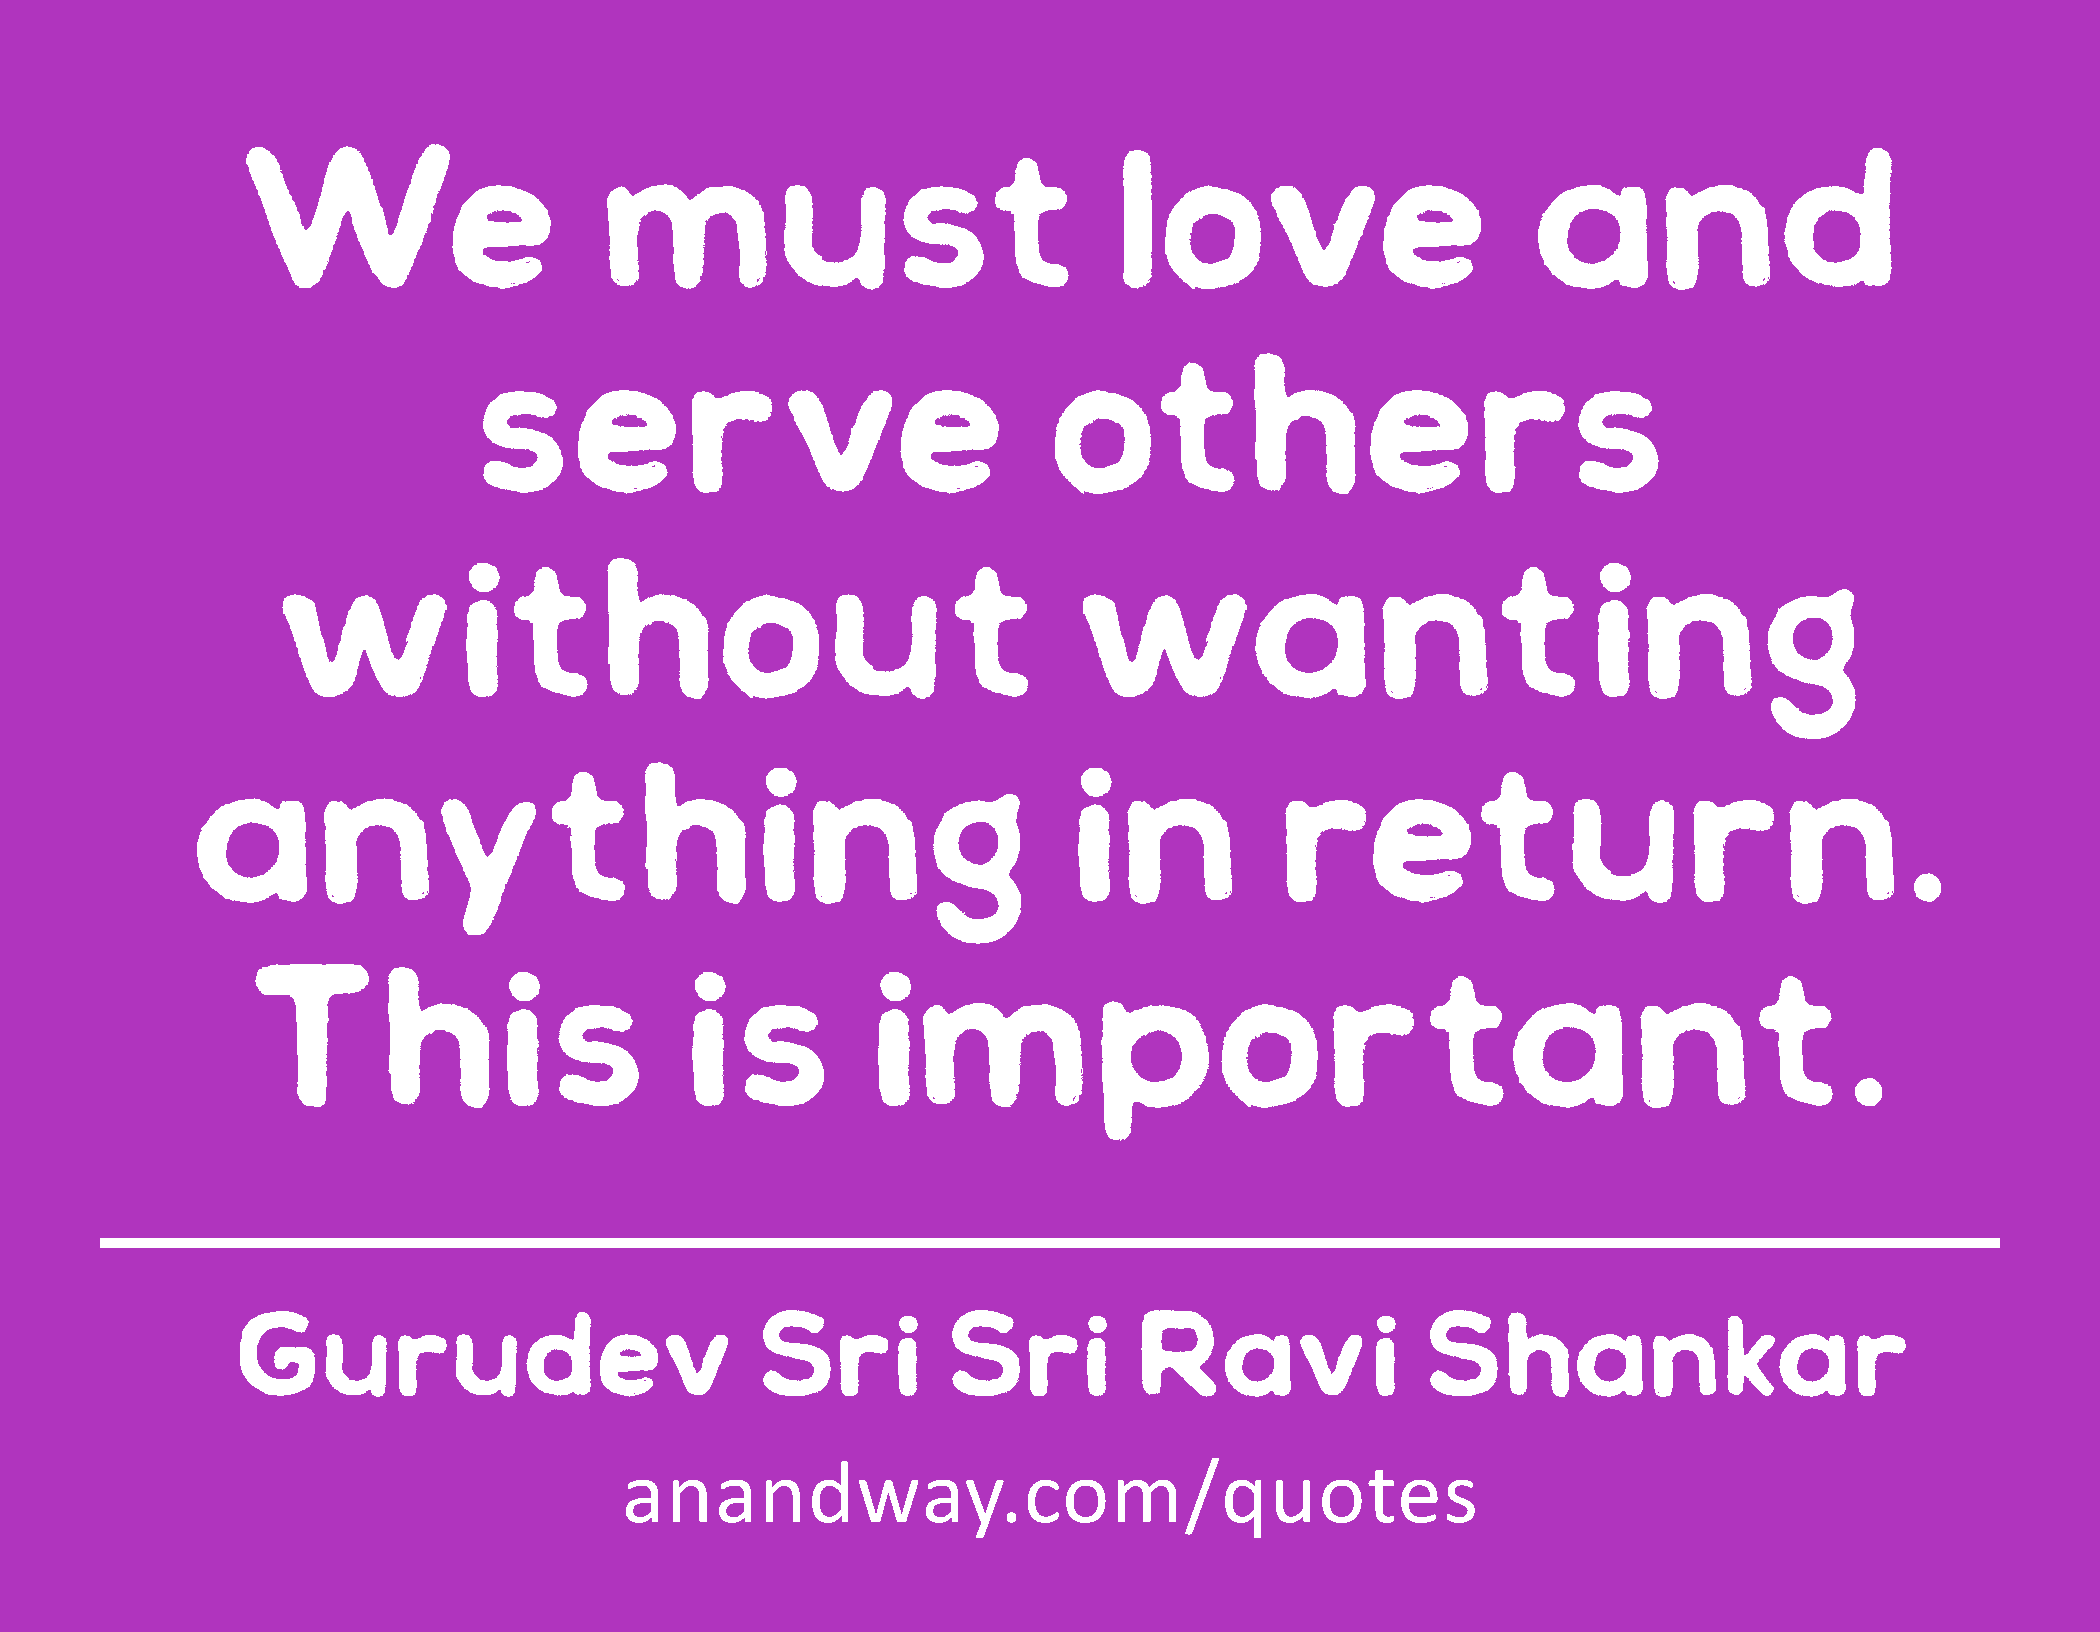 We must love and serve others without wanting anything in return. This is important.
 -Gurudev Sri Sri Ravi Shankar